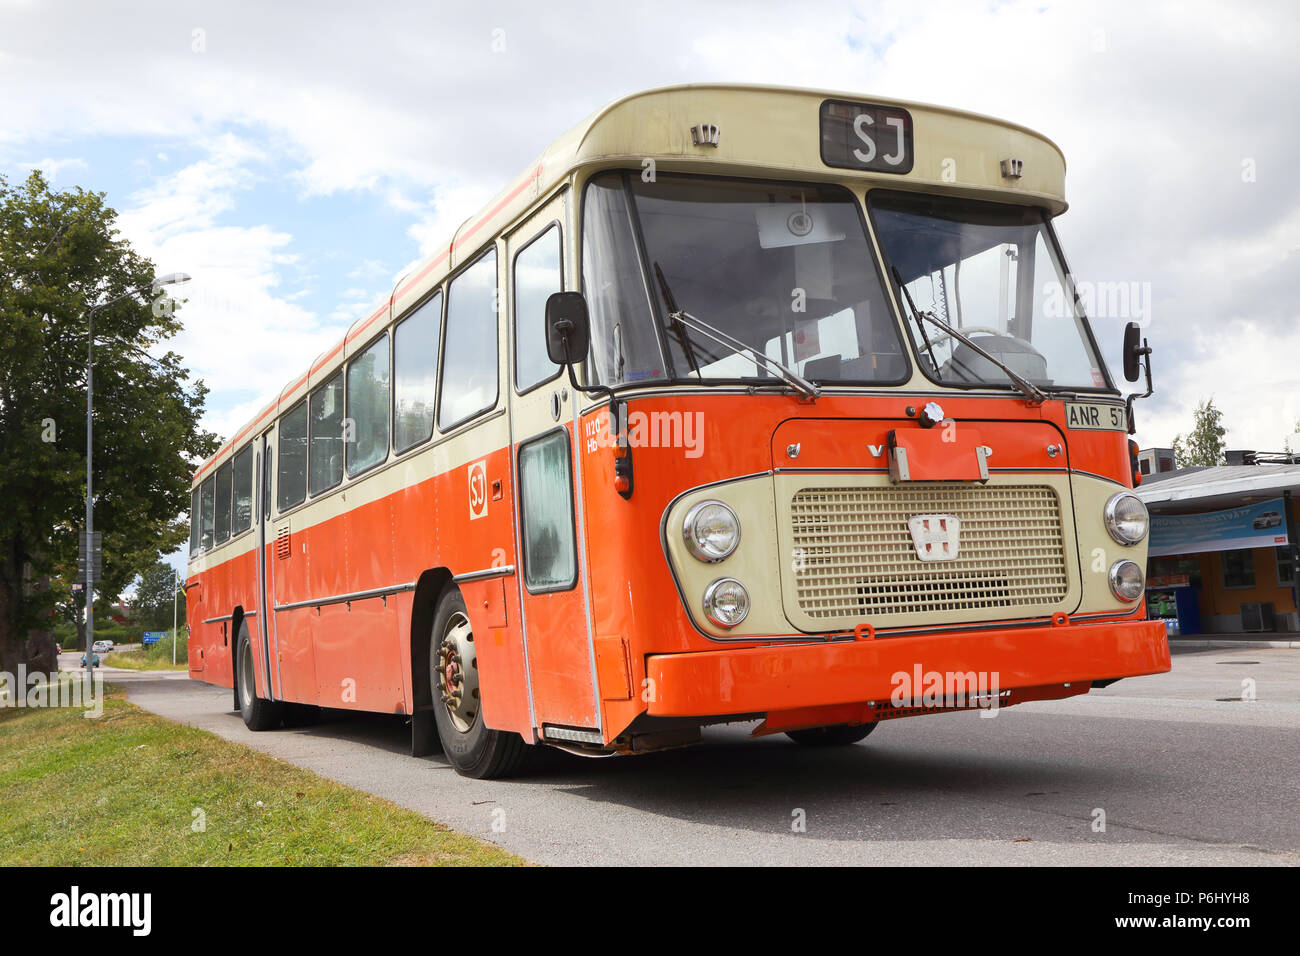 Mariefred, Sweden - August 7, 2016: Former SJ bus Volvo model B58 year 1970 with body made of Hagglund and sons painted in 1986 color scheme (orange a Stock Photo